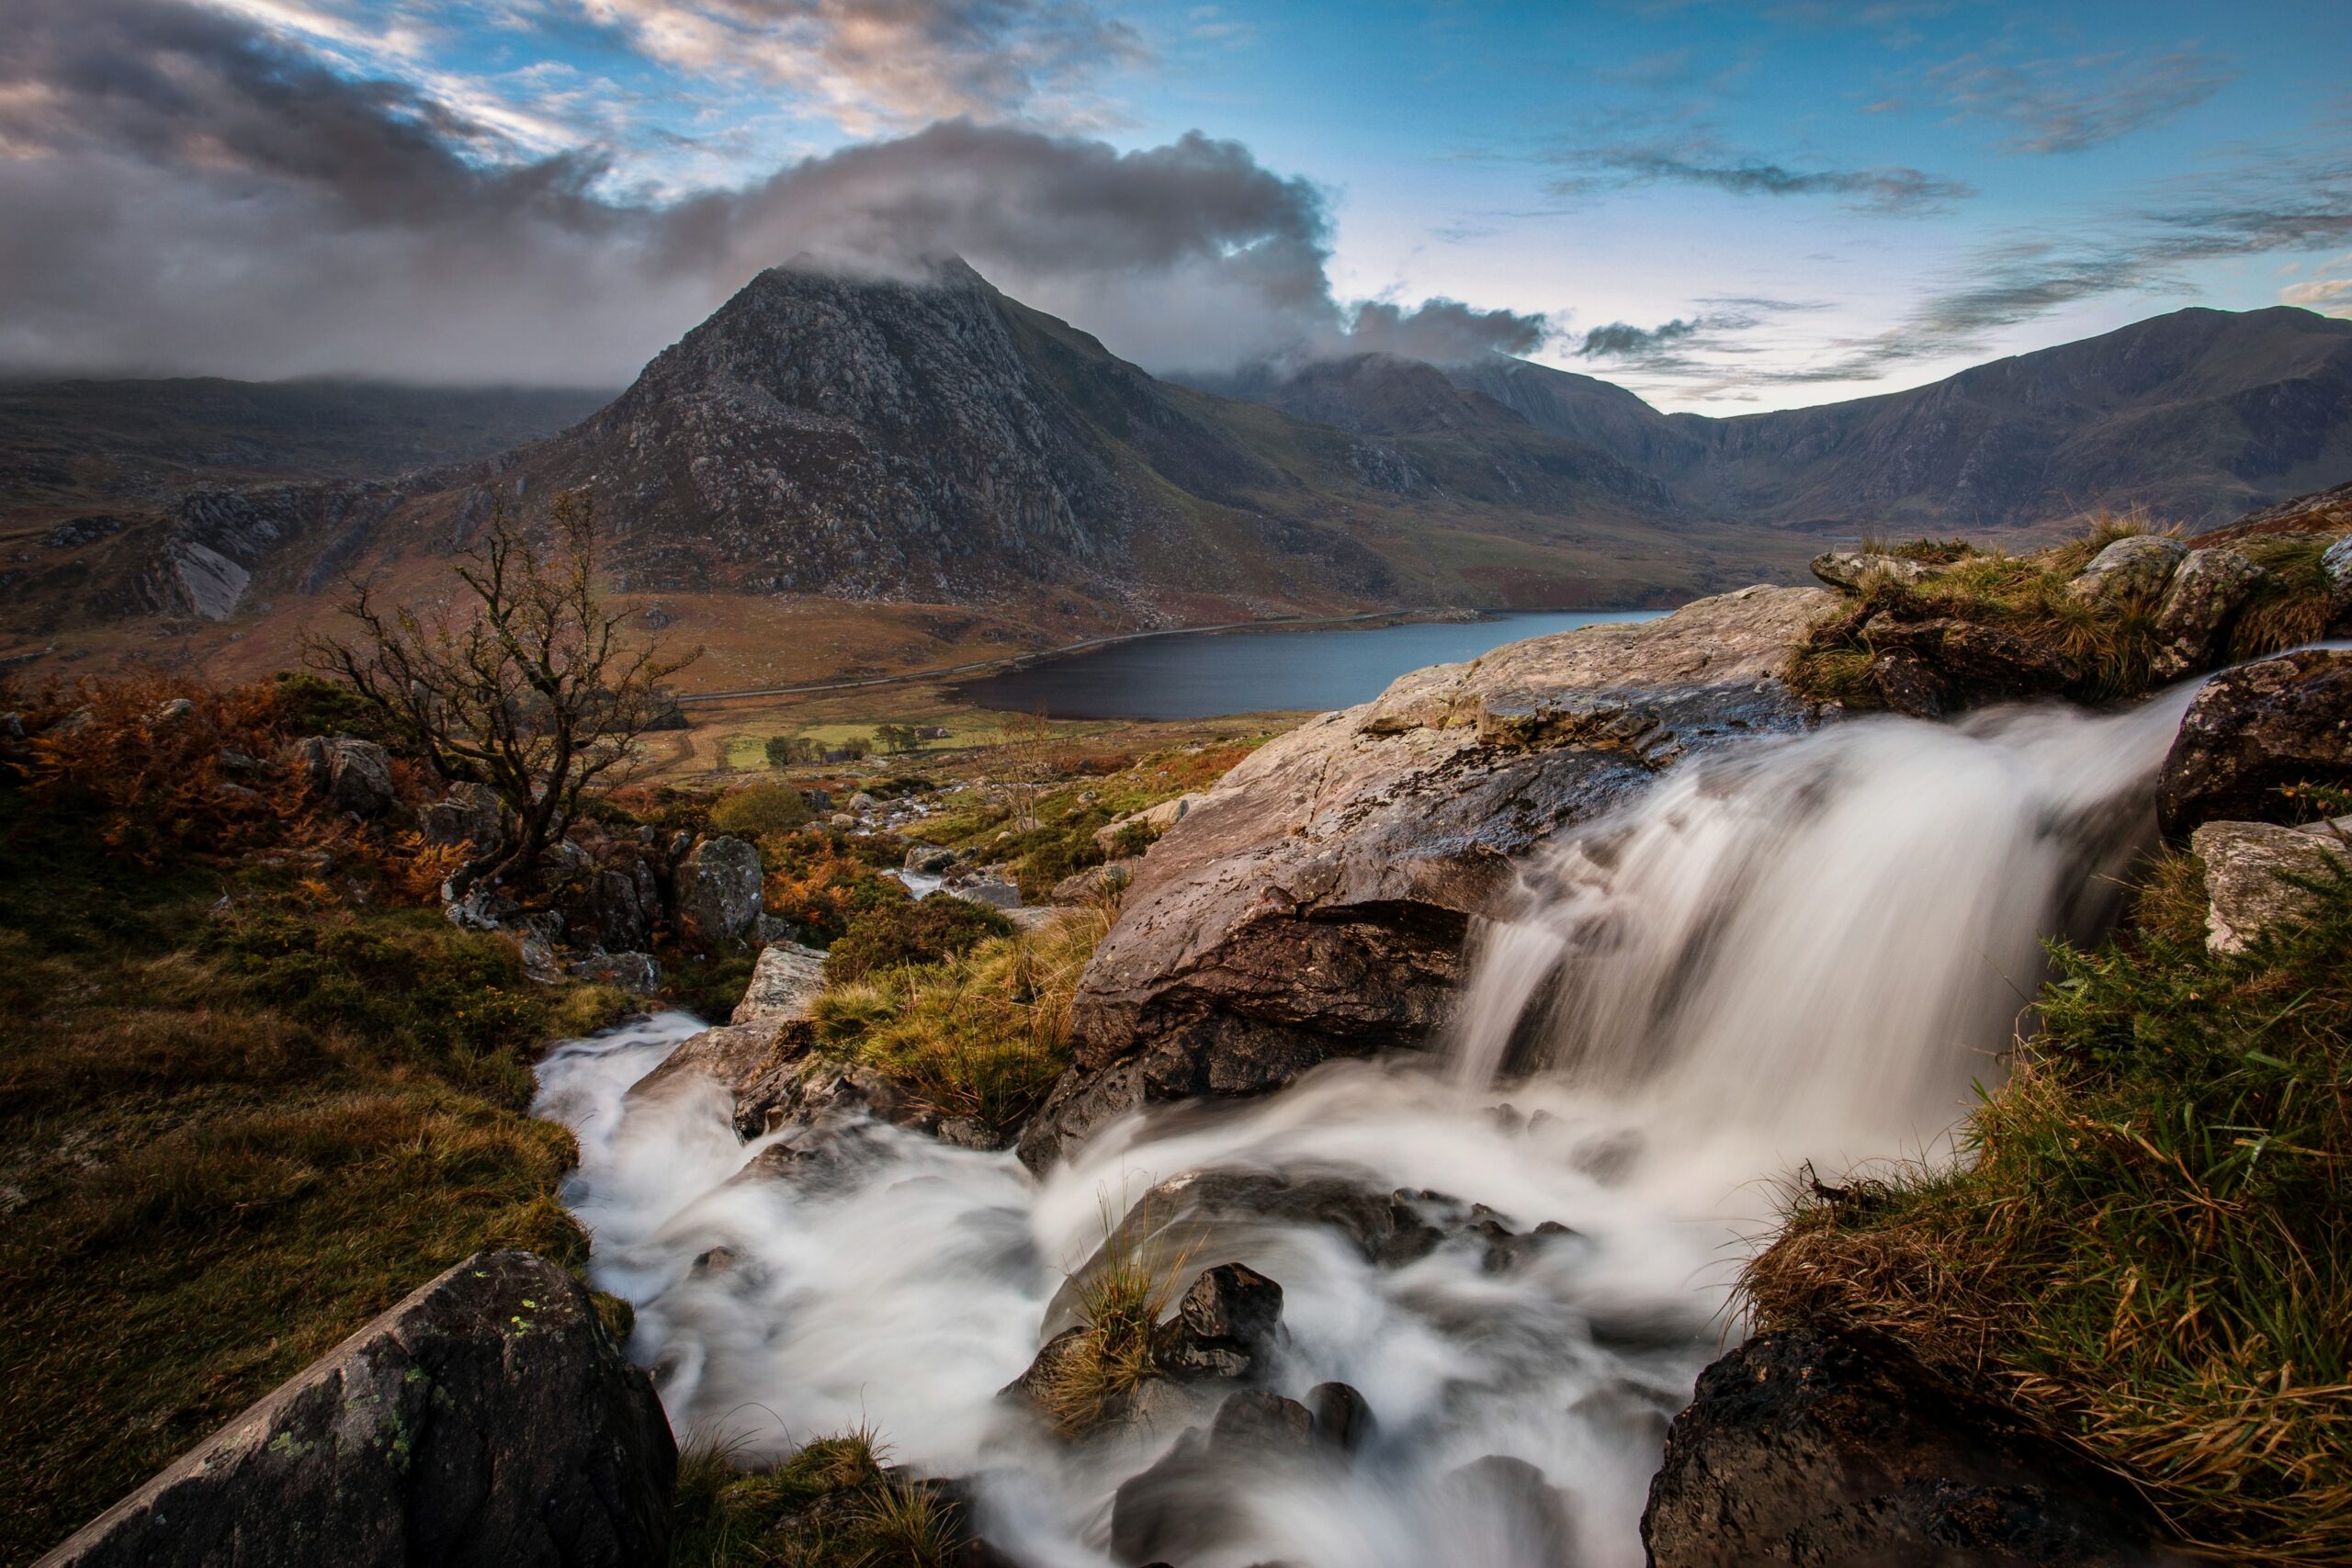 Ogwen Valley, Snowdonia National Park, Wales